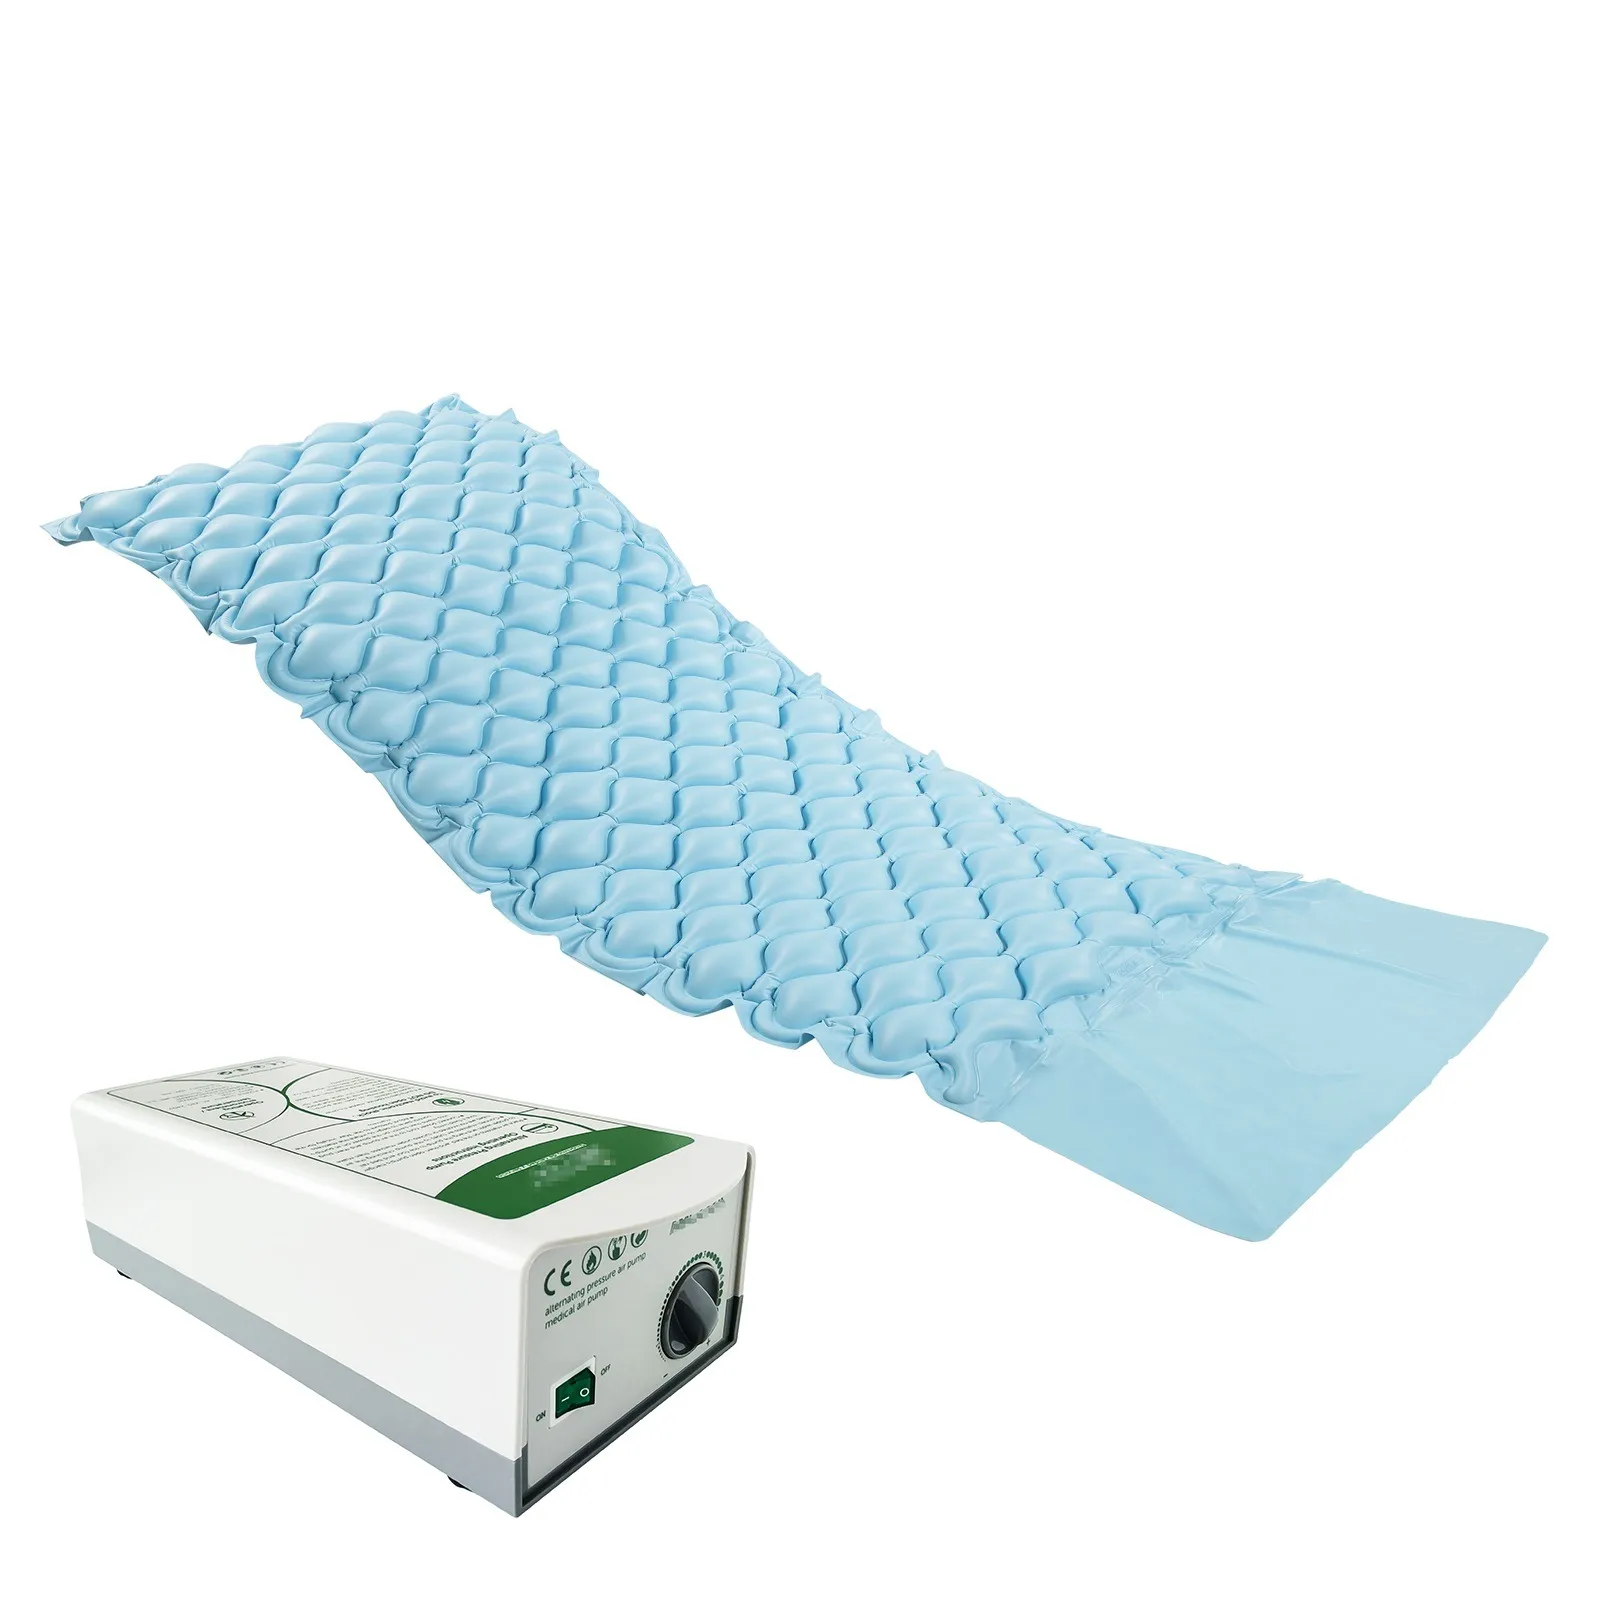 Hudson - From: 5725RG80CA To: 5725RG84CA - Pressure Eez Safety Mat Therapeutic Mattress